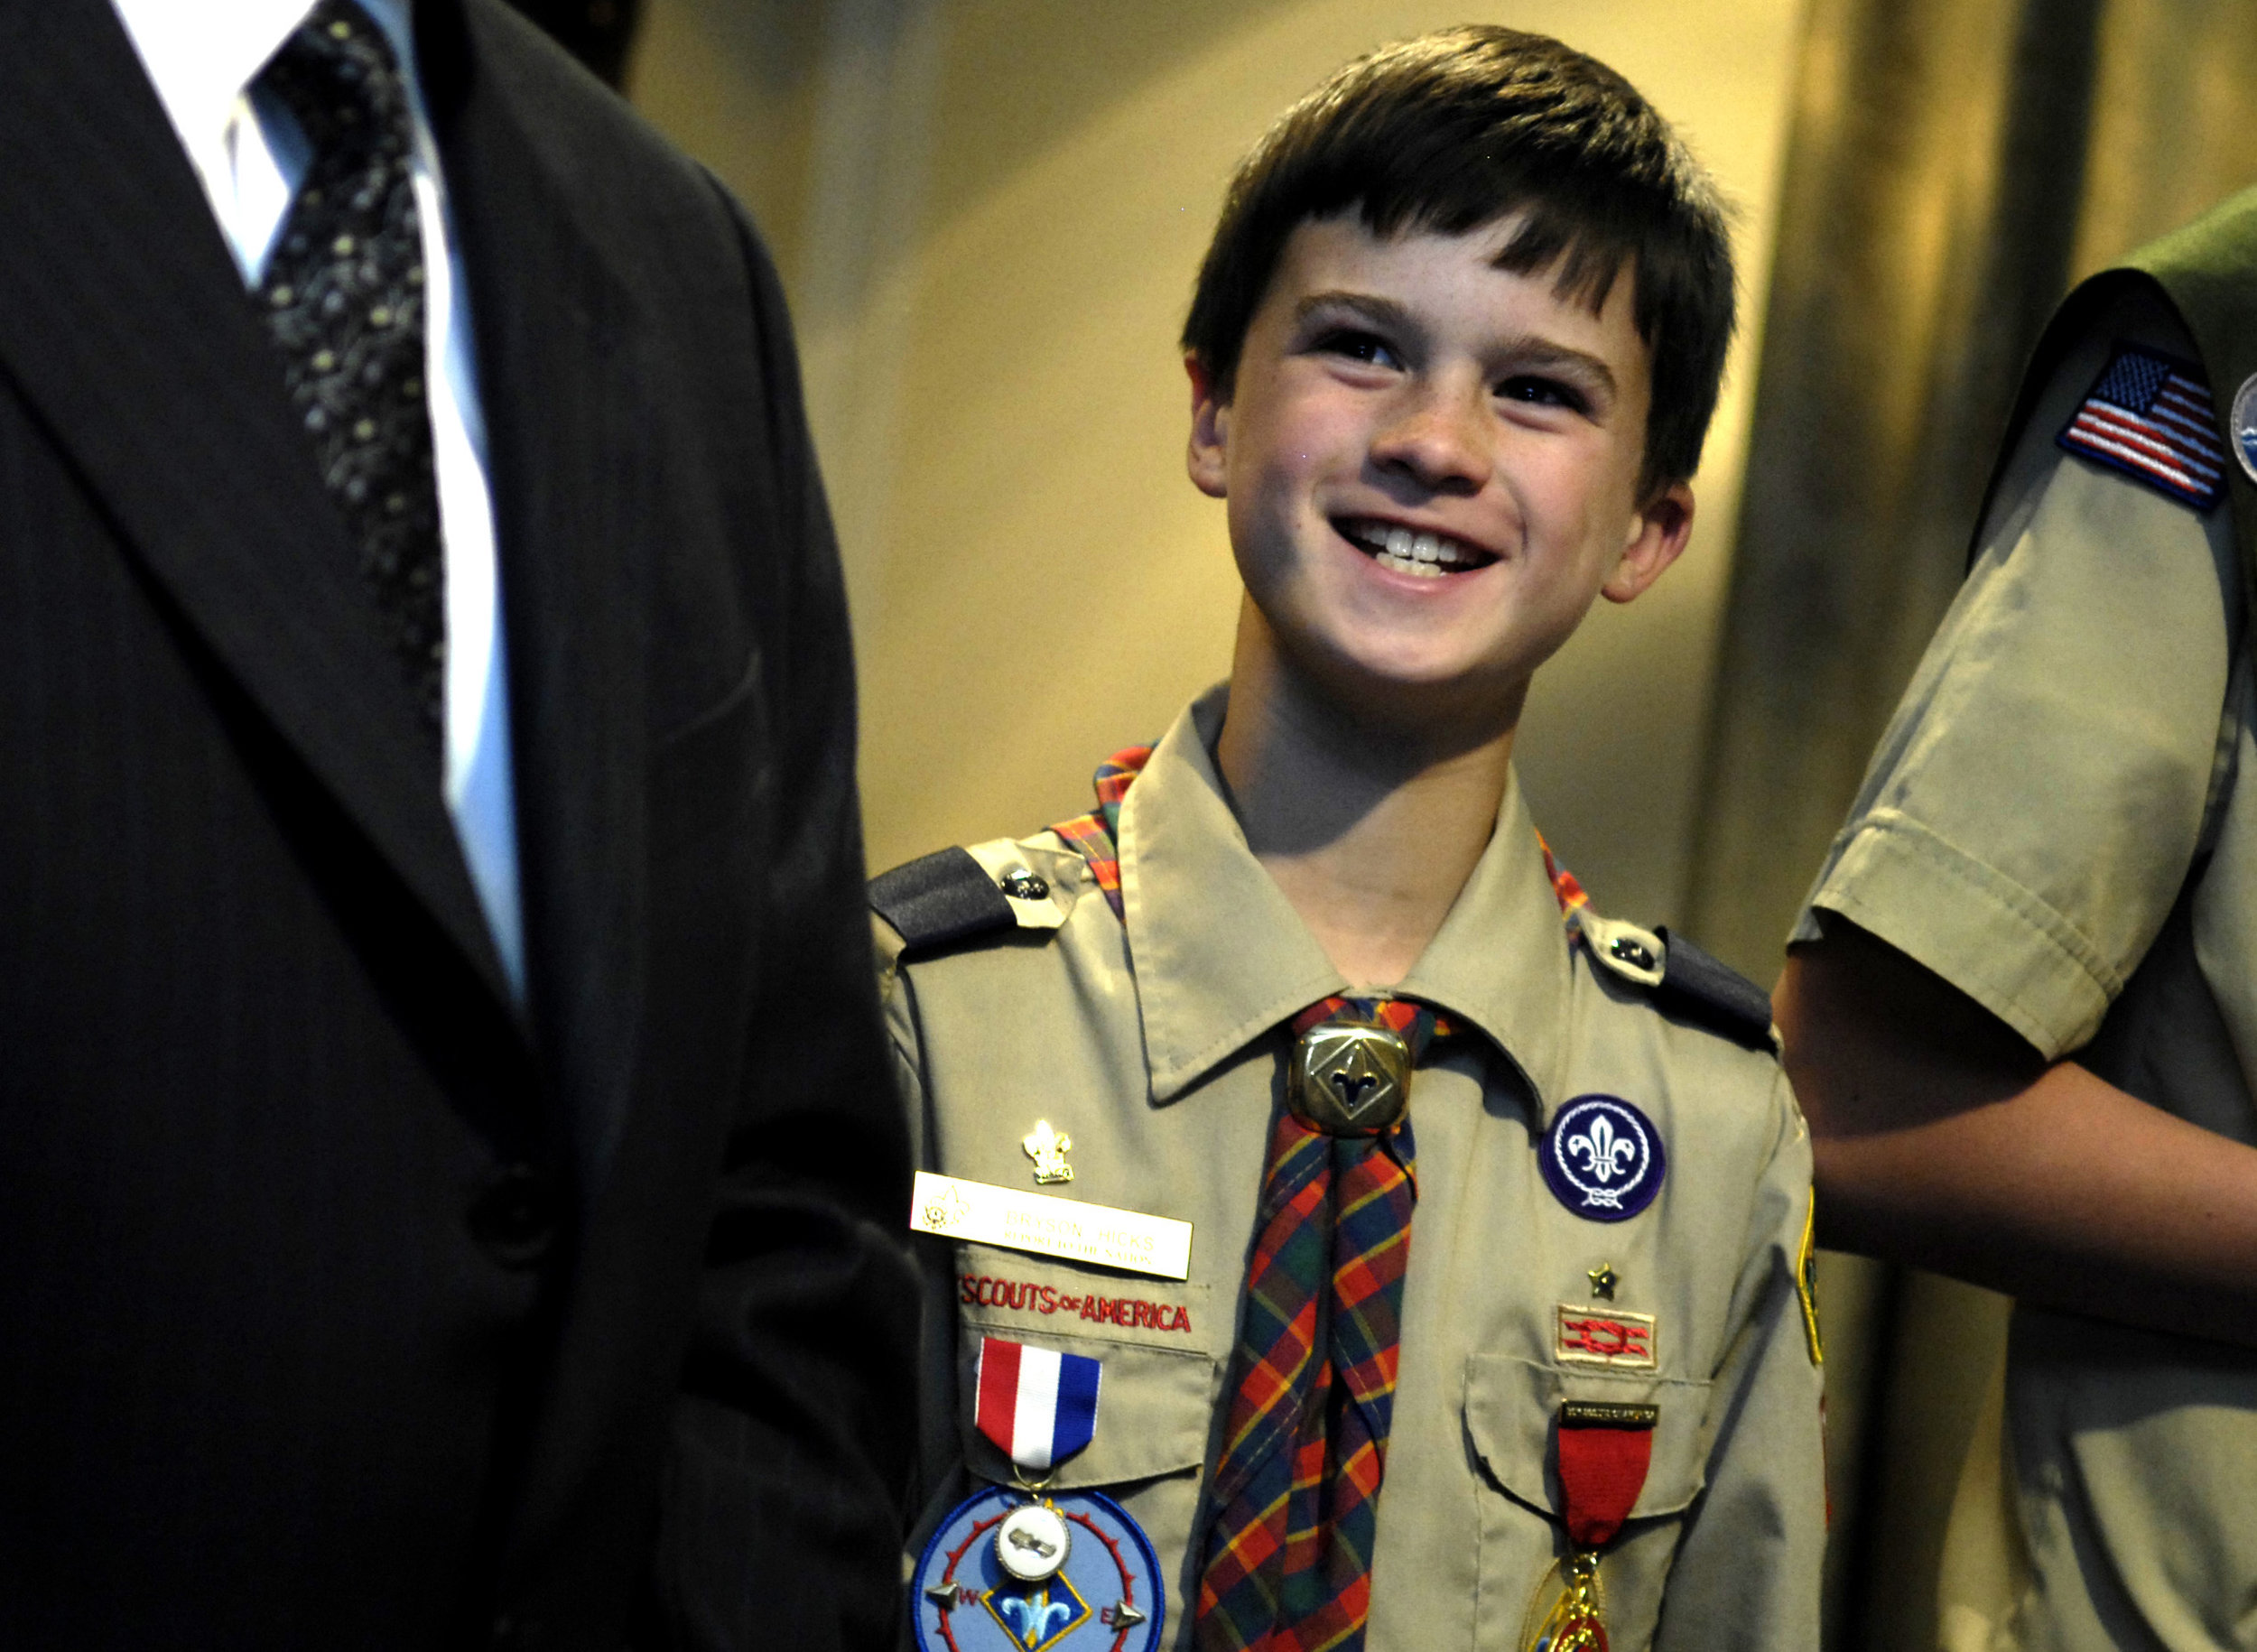 Brycon_Hix_of_the_Boy_Scouts_of_America_smiles,_2007.jpg